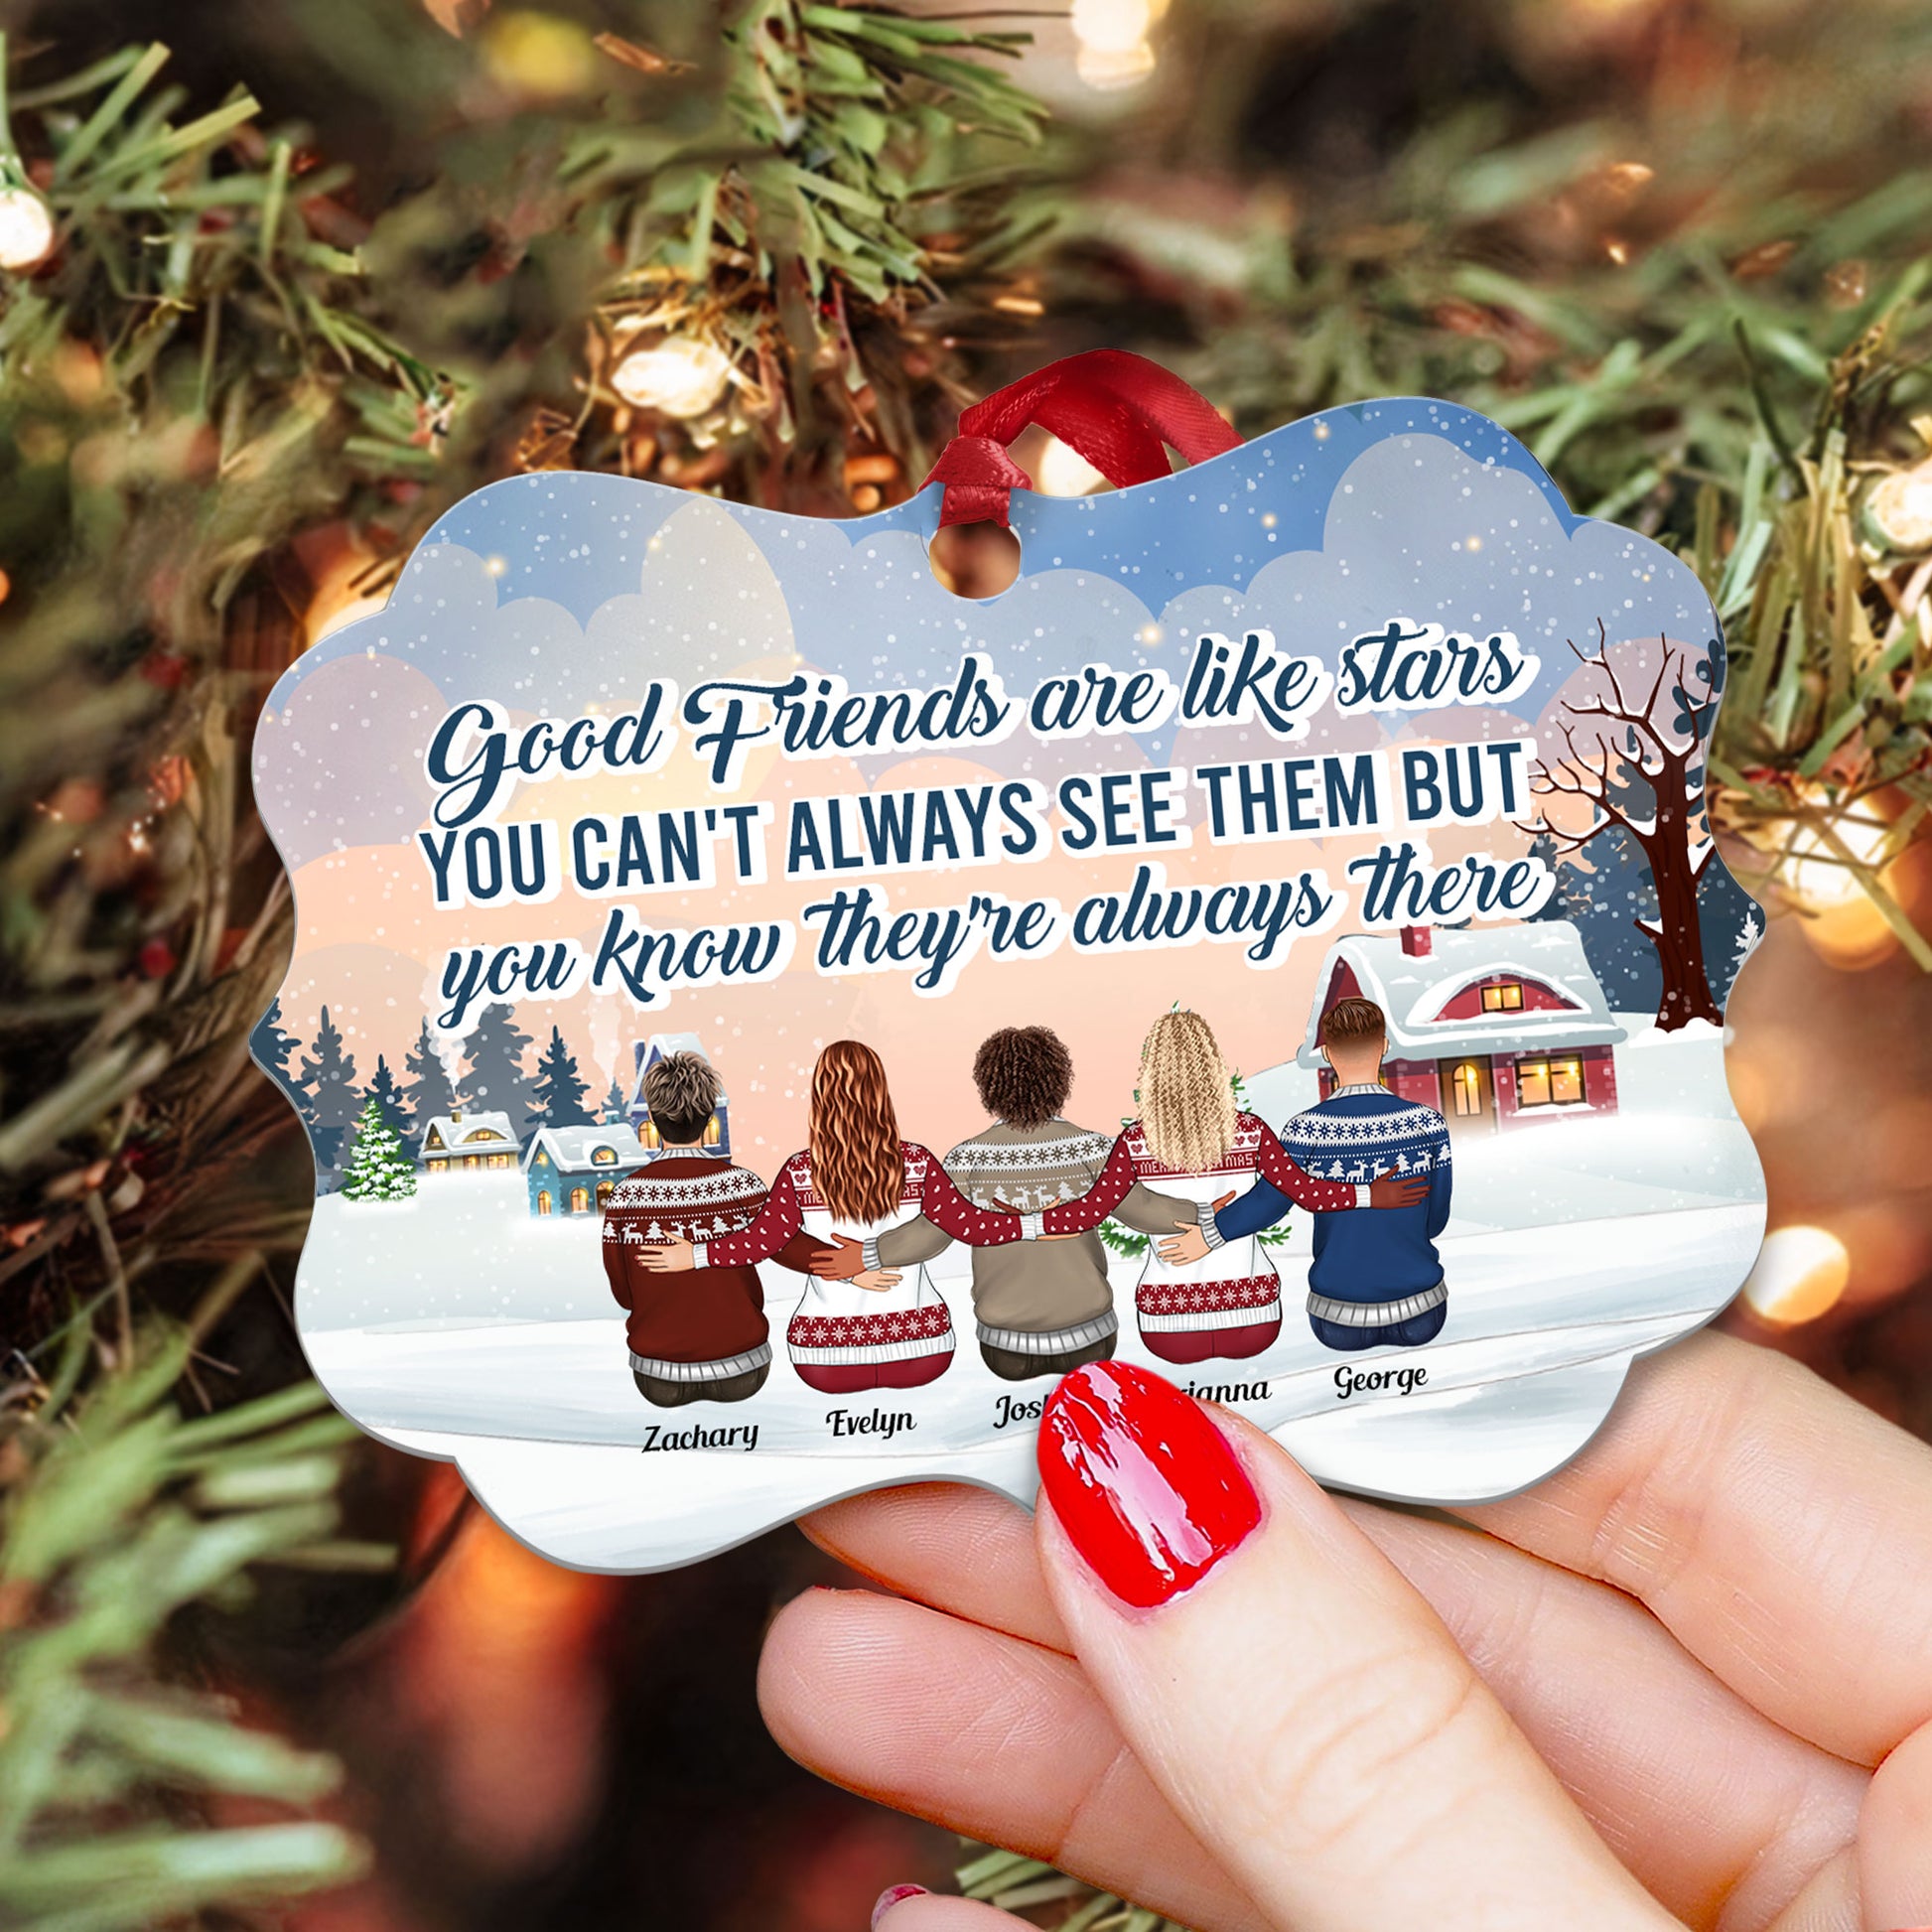 Personalized A Good Neighbor is A Welcome Blessing Ornaments, Best Neighbor  Ornament Home Decor Gifts for Christmas Tree 2023, Custom Names & Text